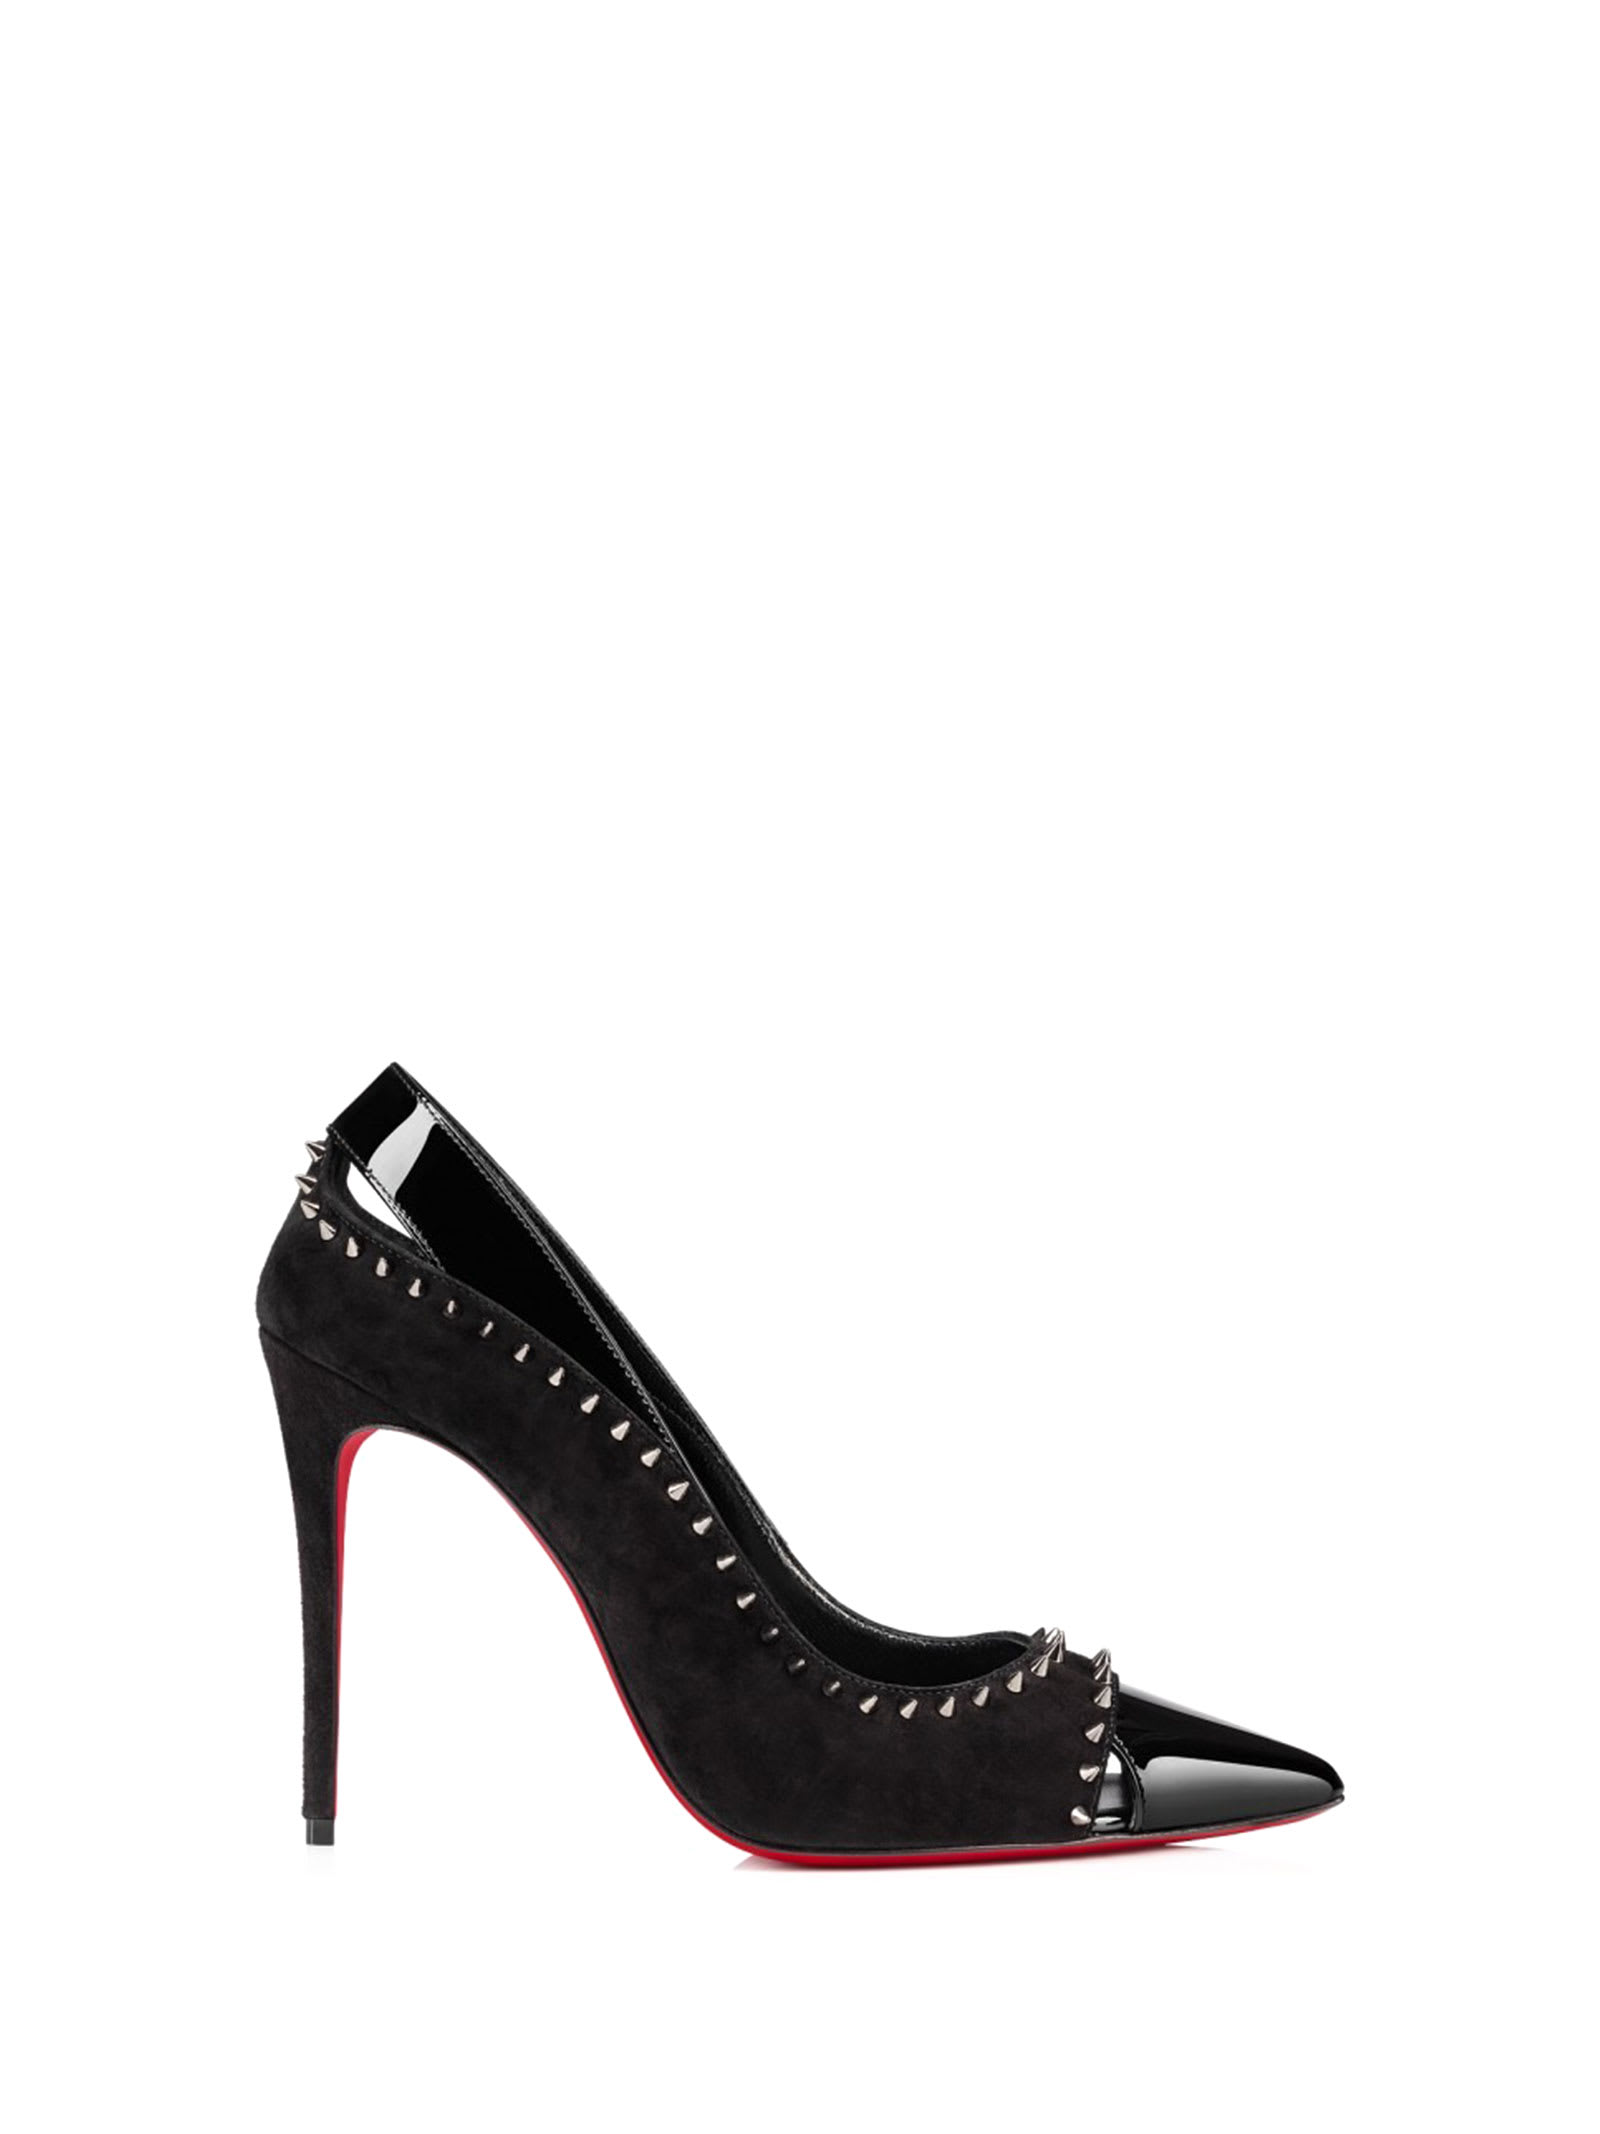 Christian Louboutin Pumps In Patent Calf And Spikes